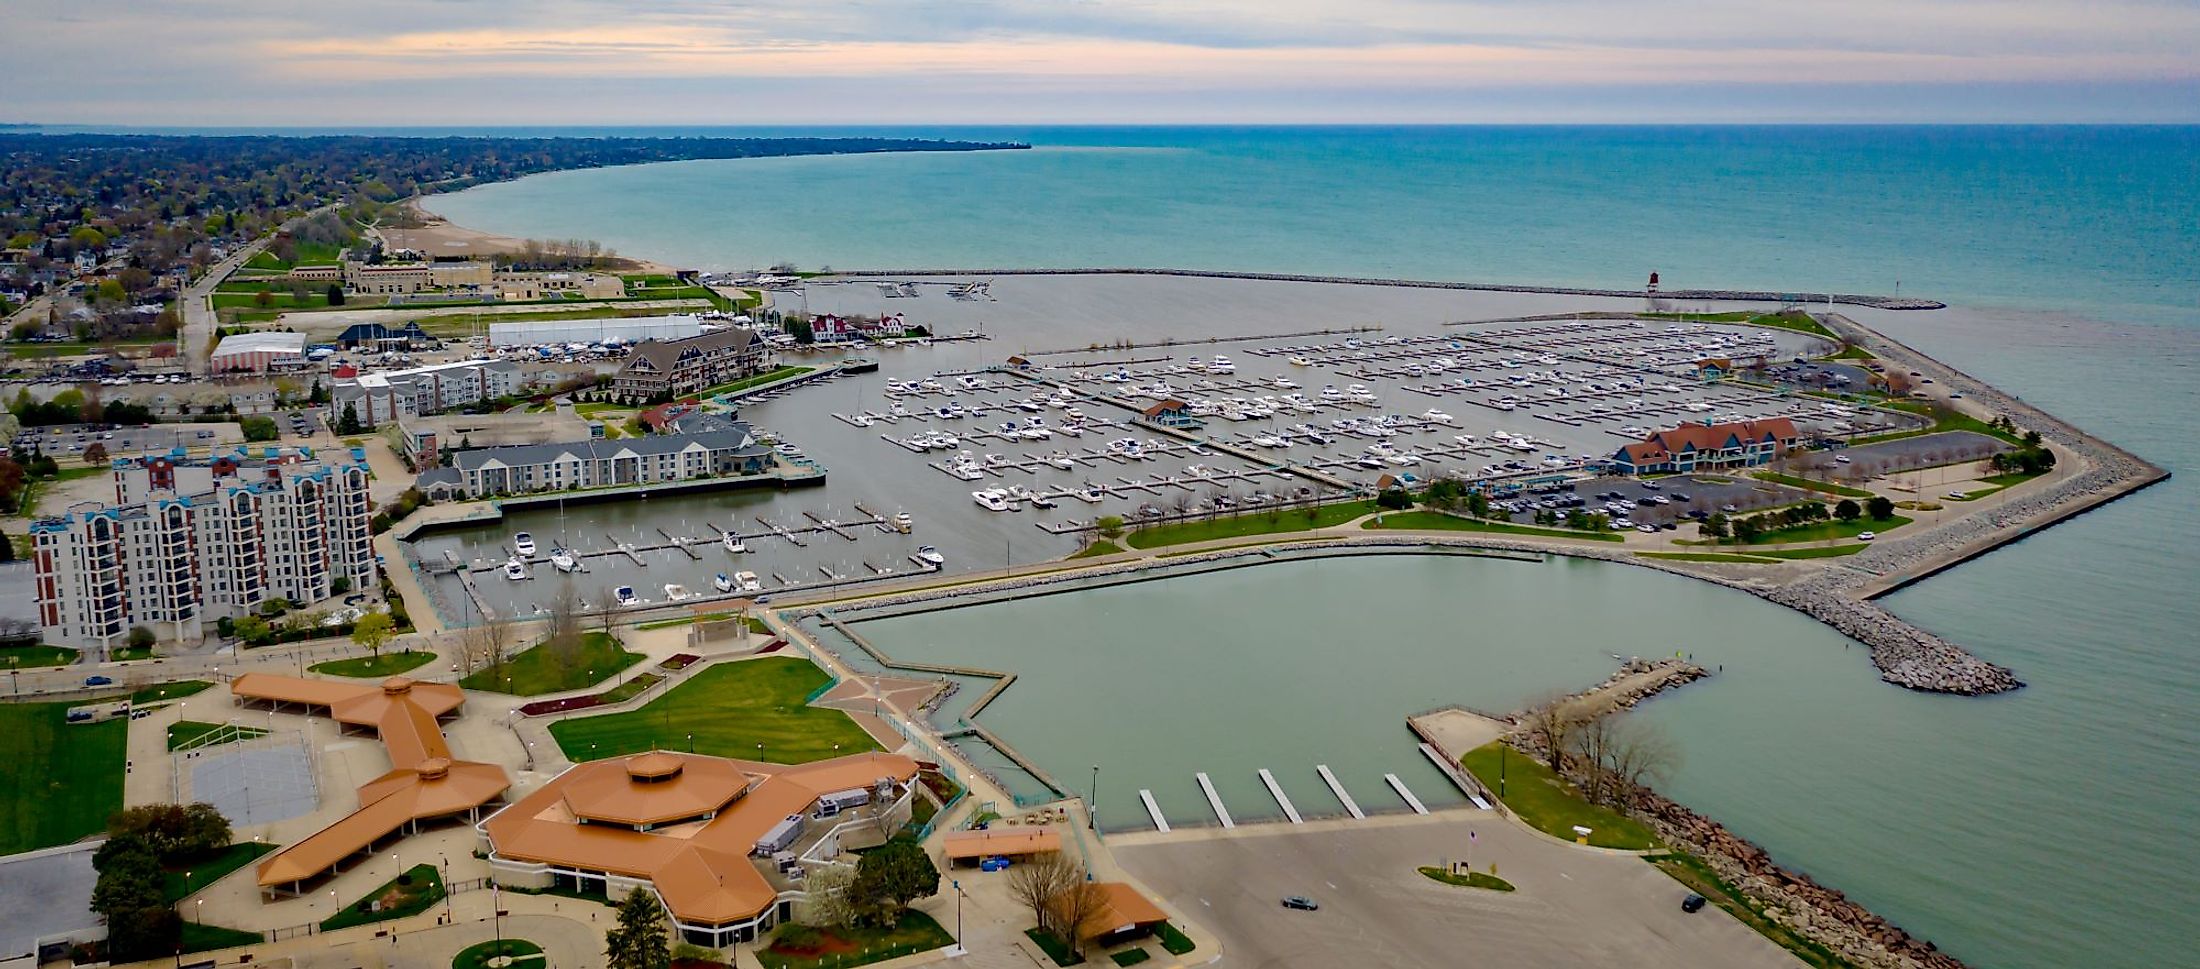 A view of the lake front at Racine, Wisconsin